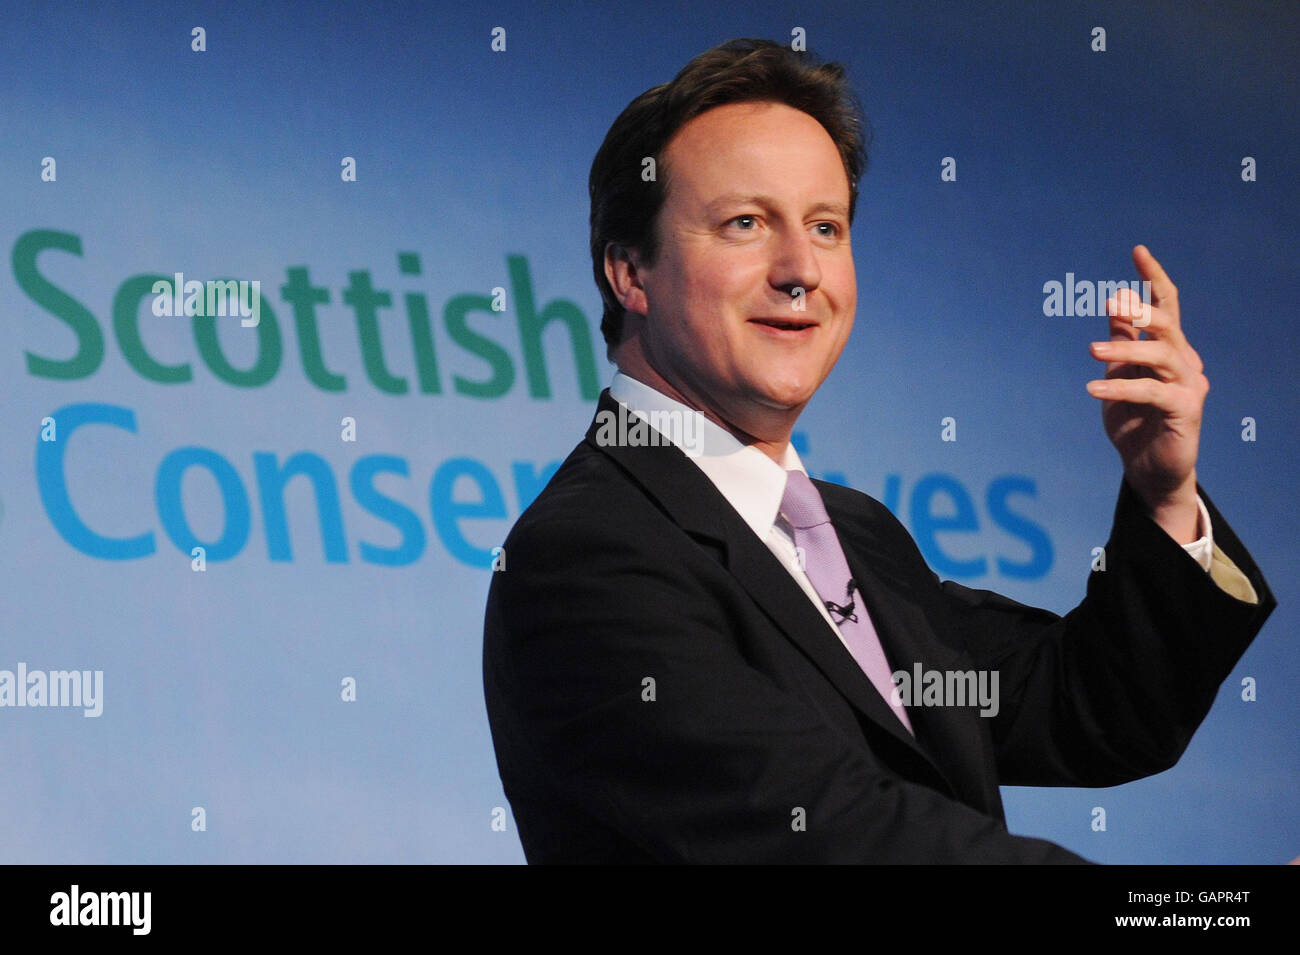 Scottish Conservative Party Conference Stock Photo